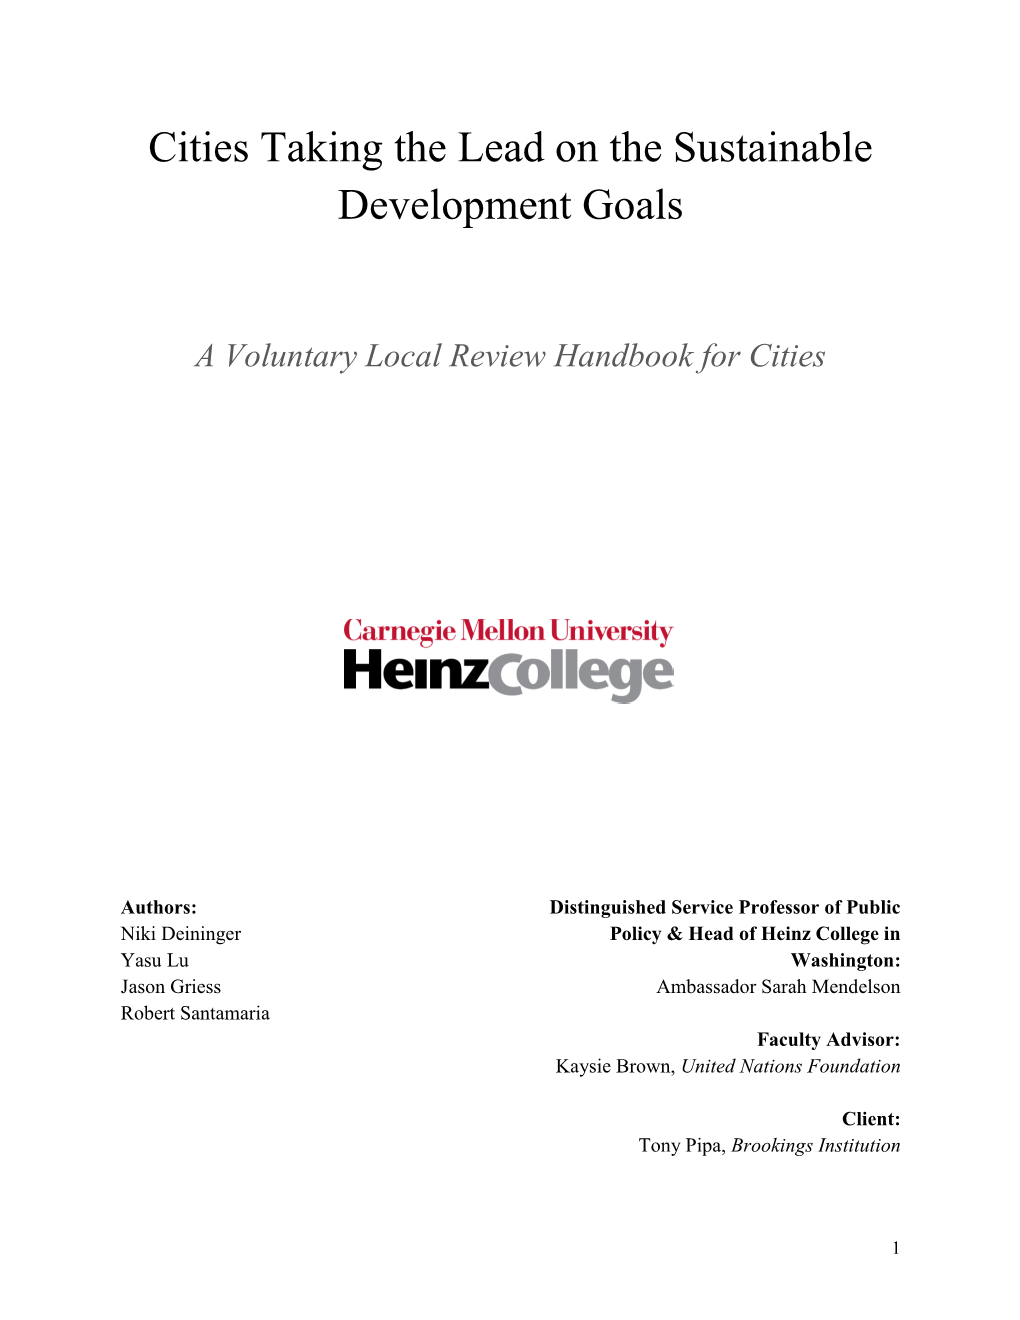 Cities Taking the Lead on the Sustainable Development Goals